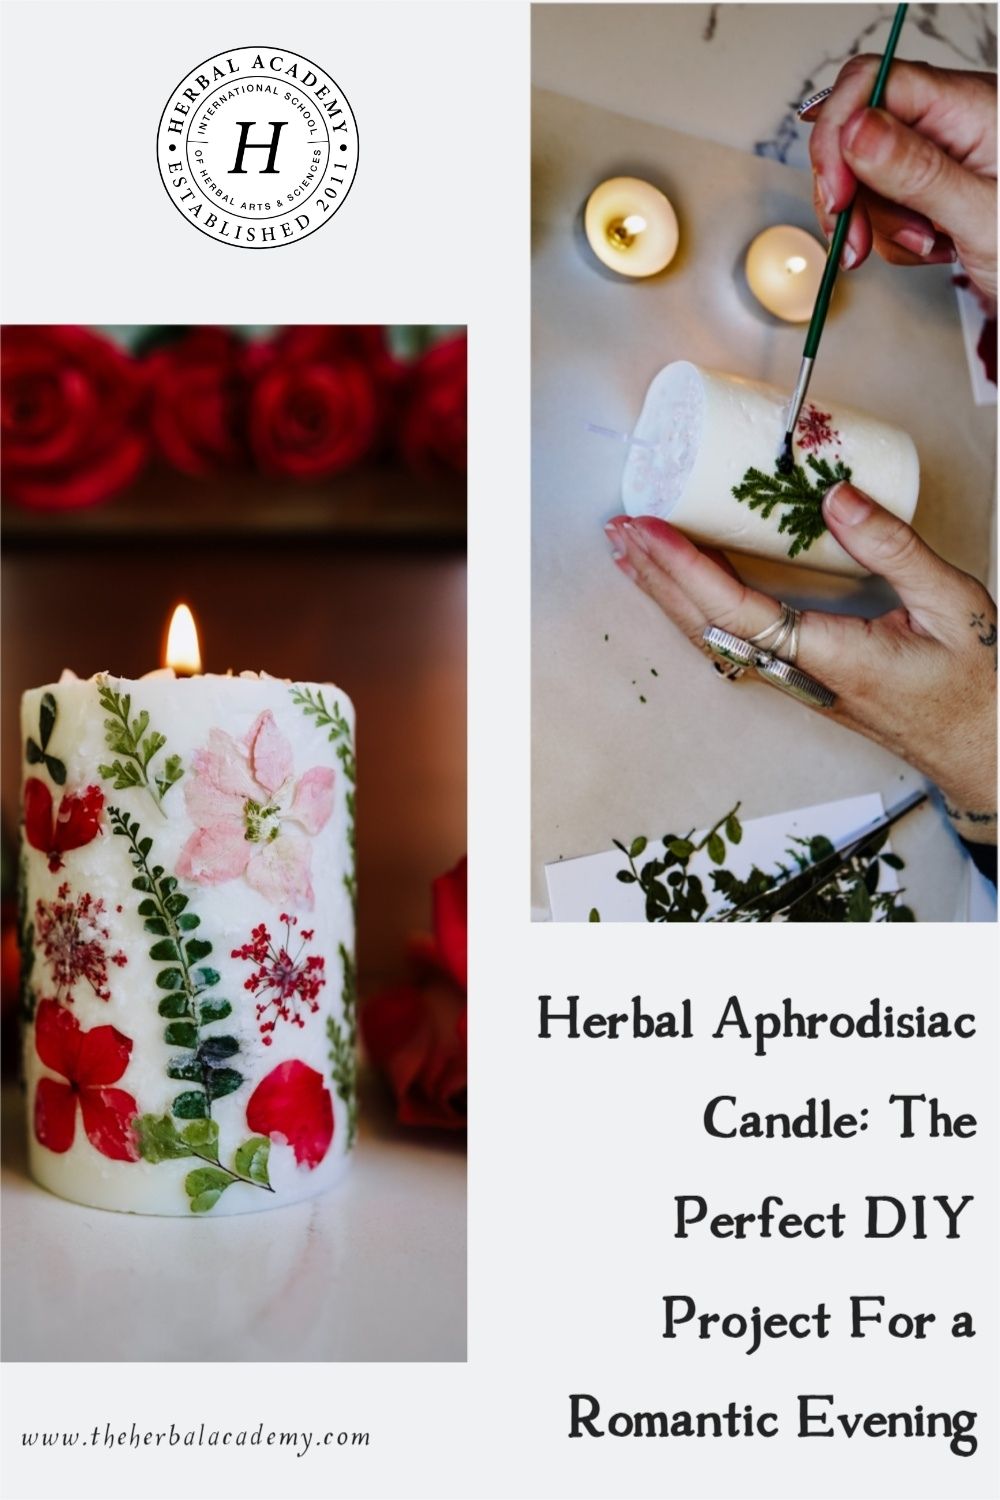 Herbal Aphrodisiac Candle: The Perfect DIY Project For a Romantic Evening | Herbal Academy | A DIY to try this February is an herbal aphrodisiac candle. Turn up the passion and light a fire with this handmade, sensually scented candle.